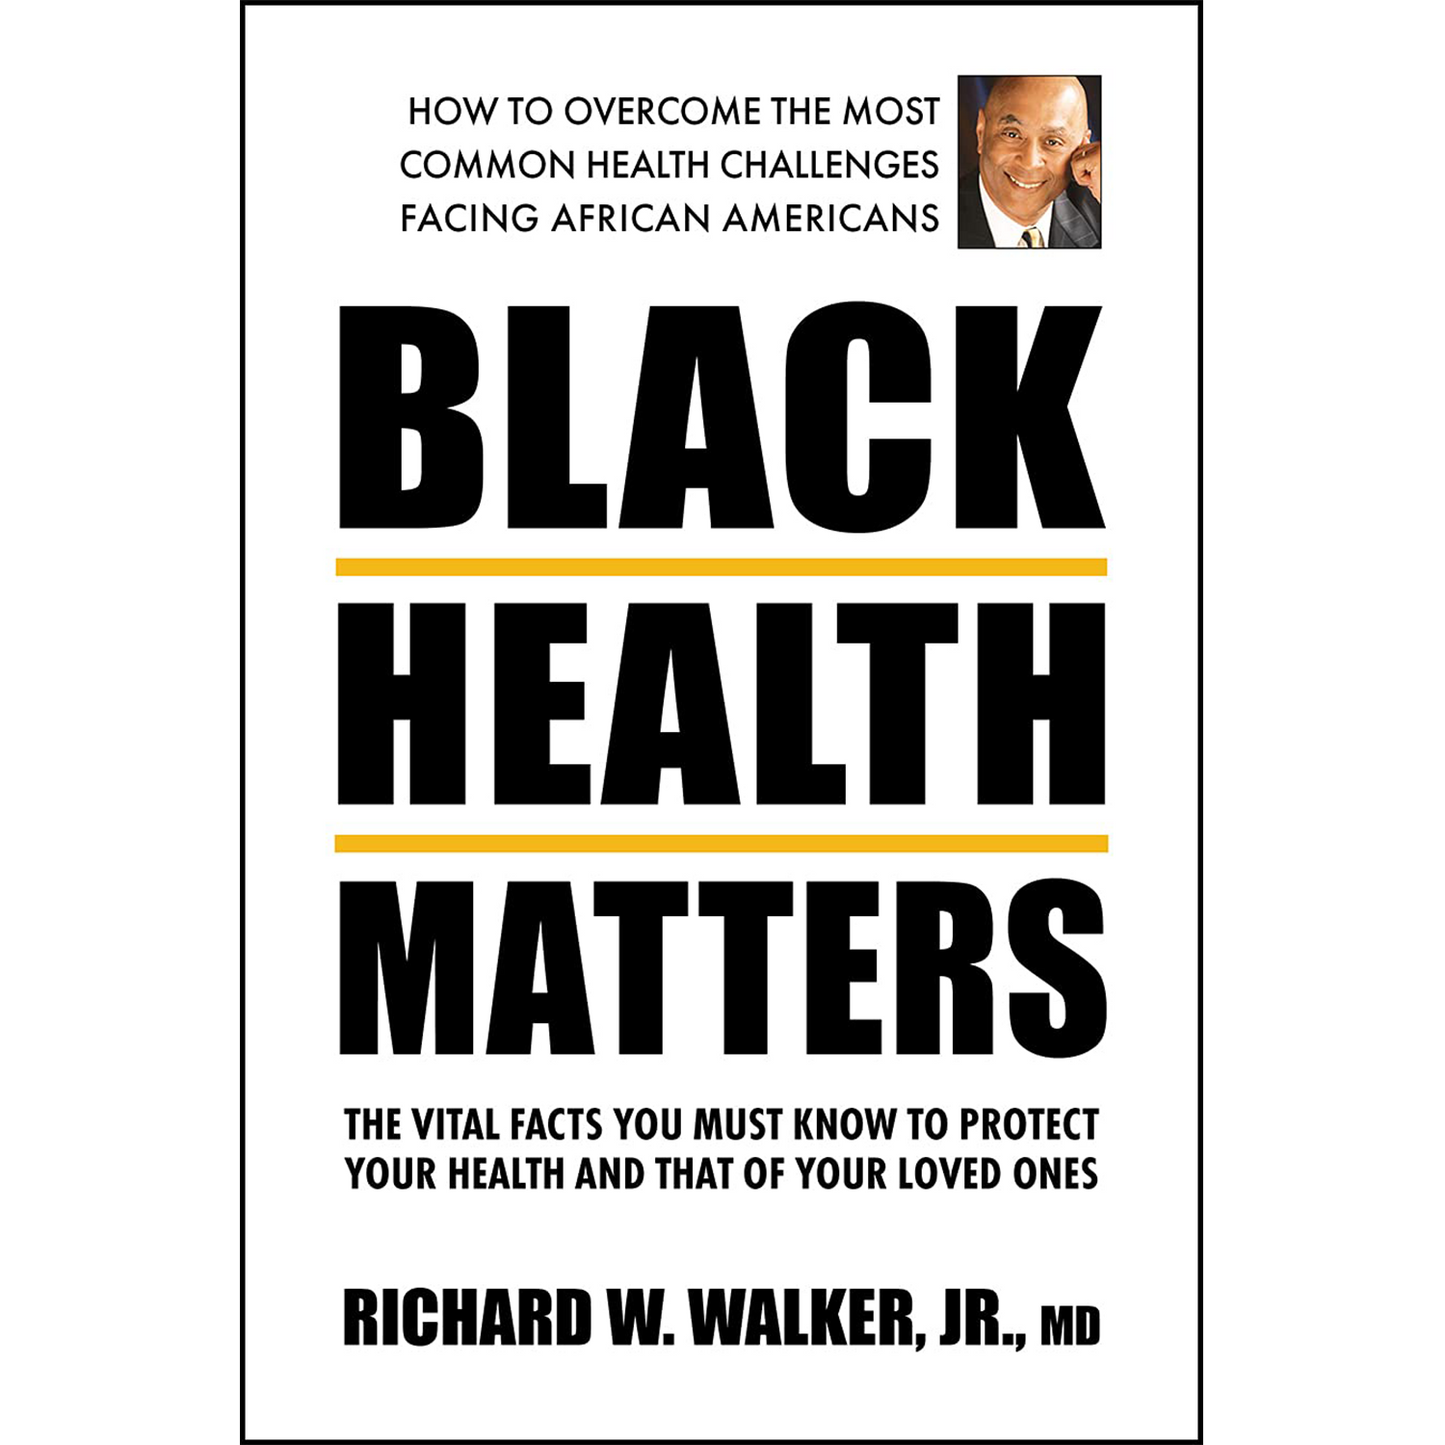 Black Health Matters: The Vital Facts You Must Know to Protect Your Health and Those of Your Loved Ones